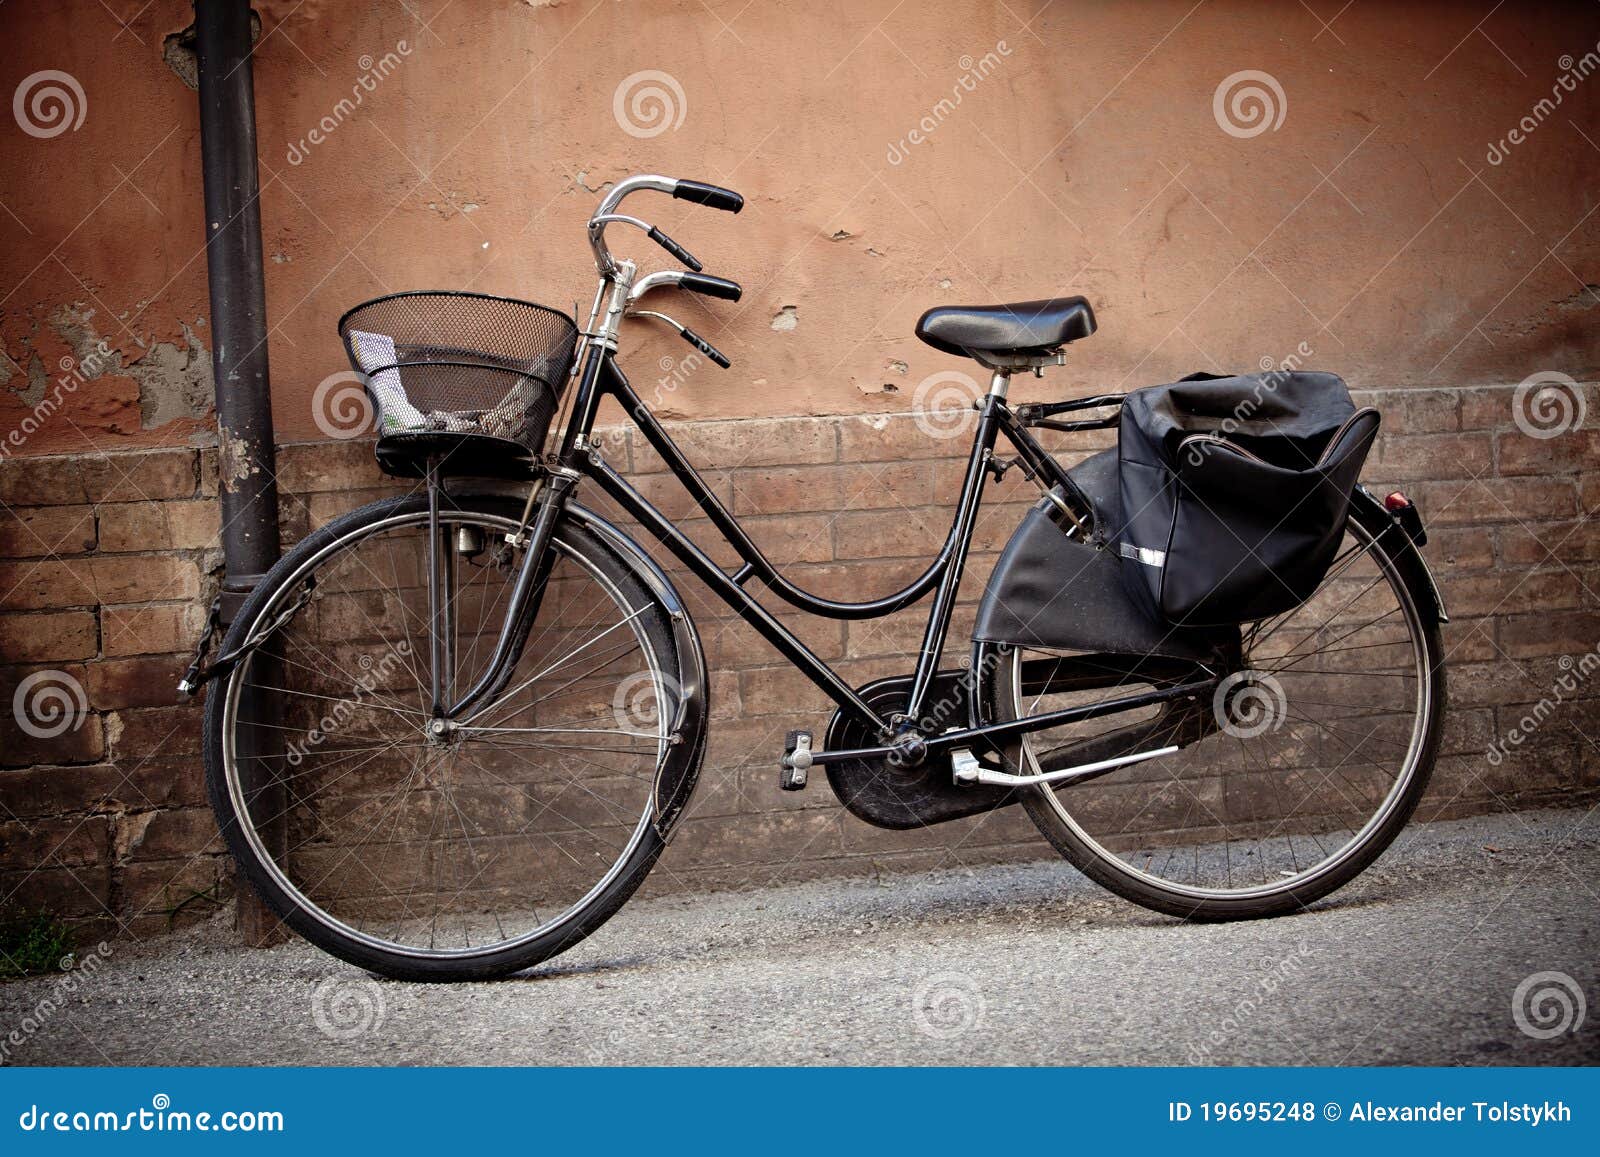 Old Retro Bicycle With Basket In Italy Royalty Free Stock Photos inside Amazing Old Fashioned Bicycles With Baskets – Perfect Photo Source